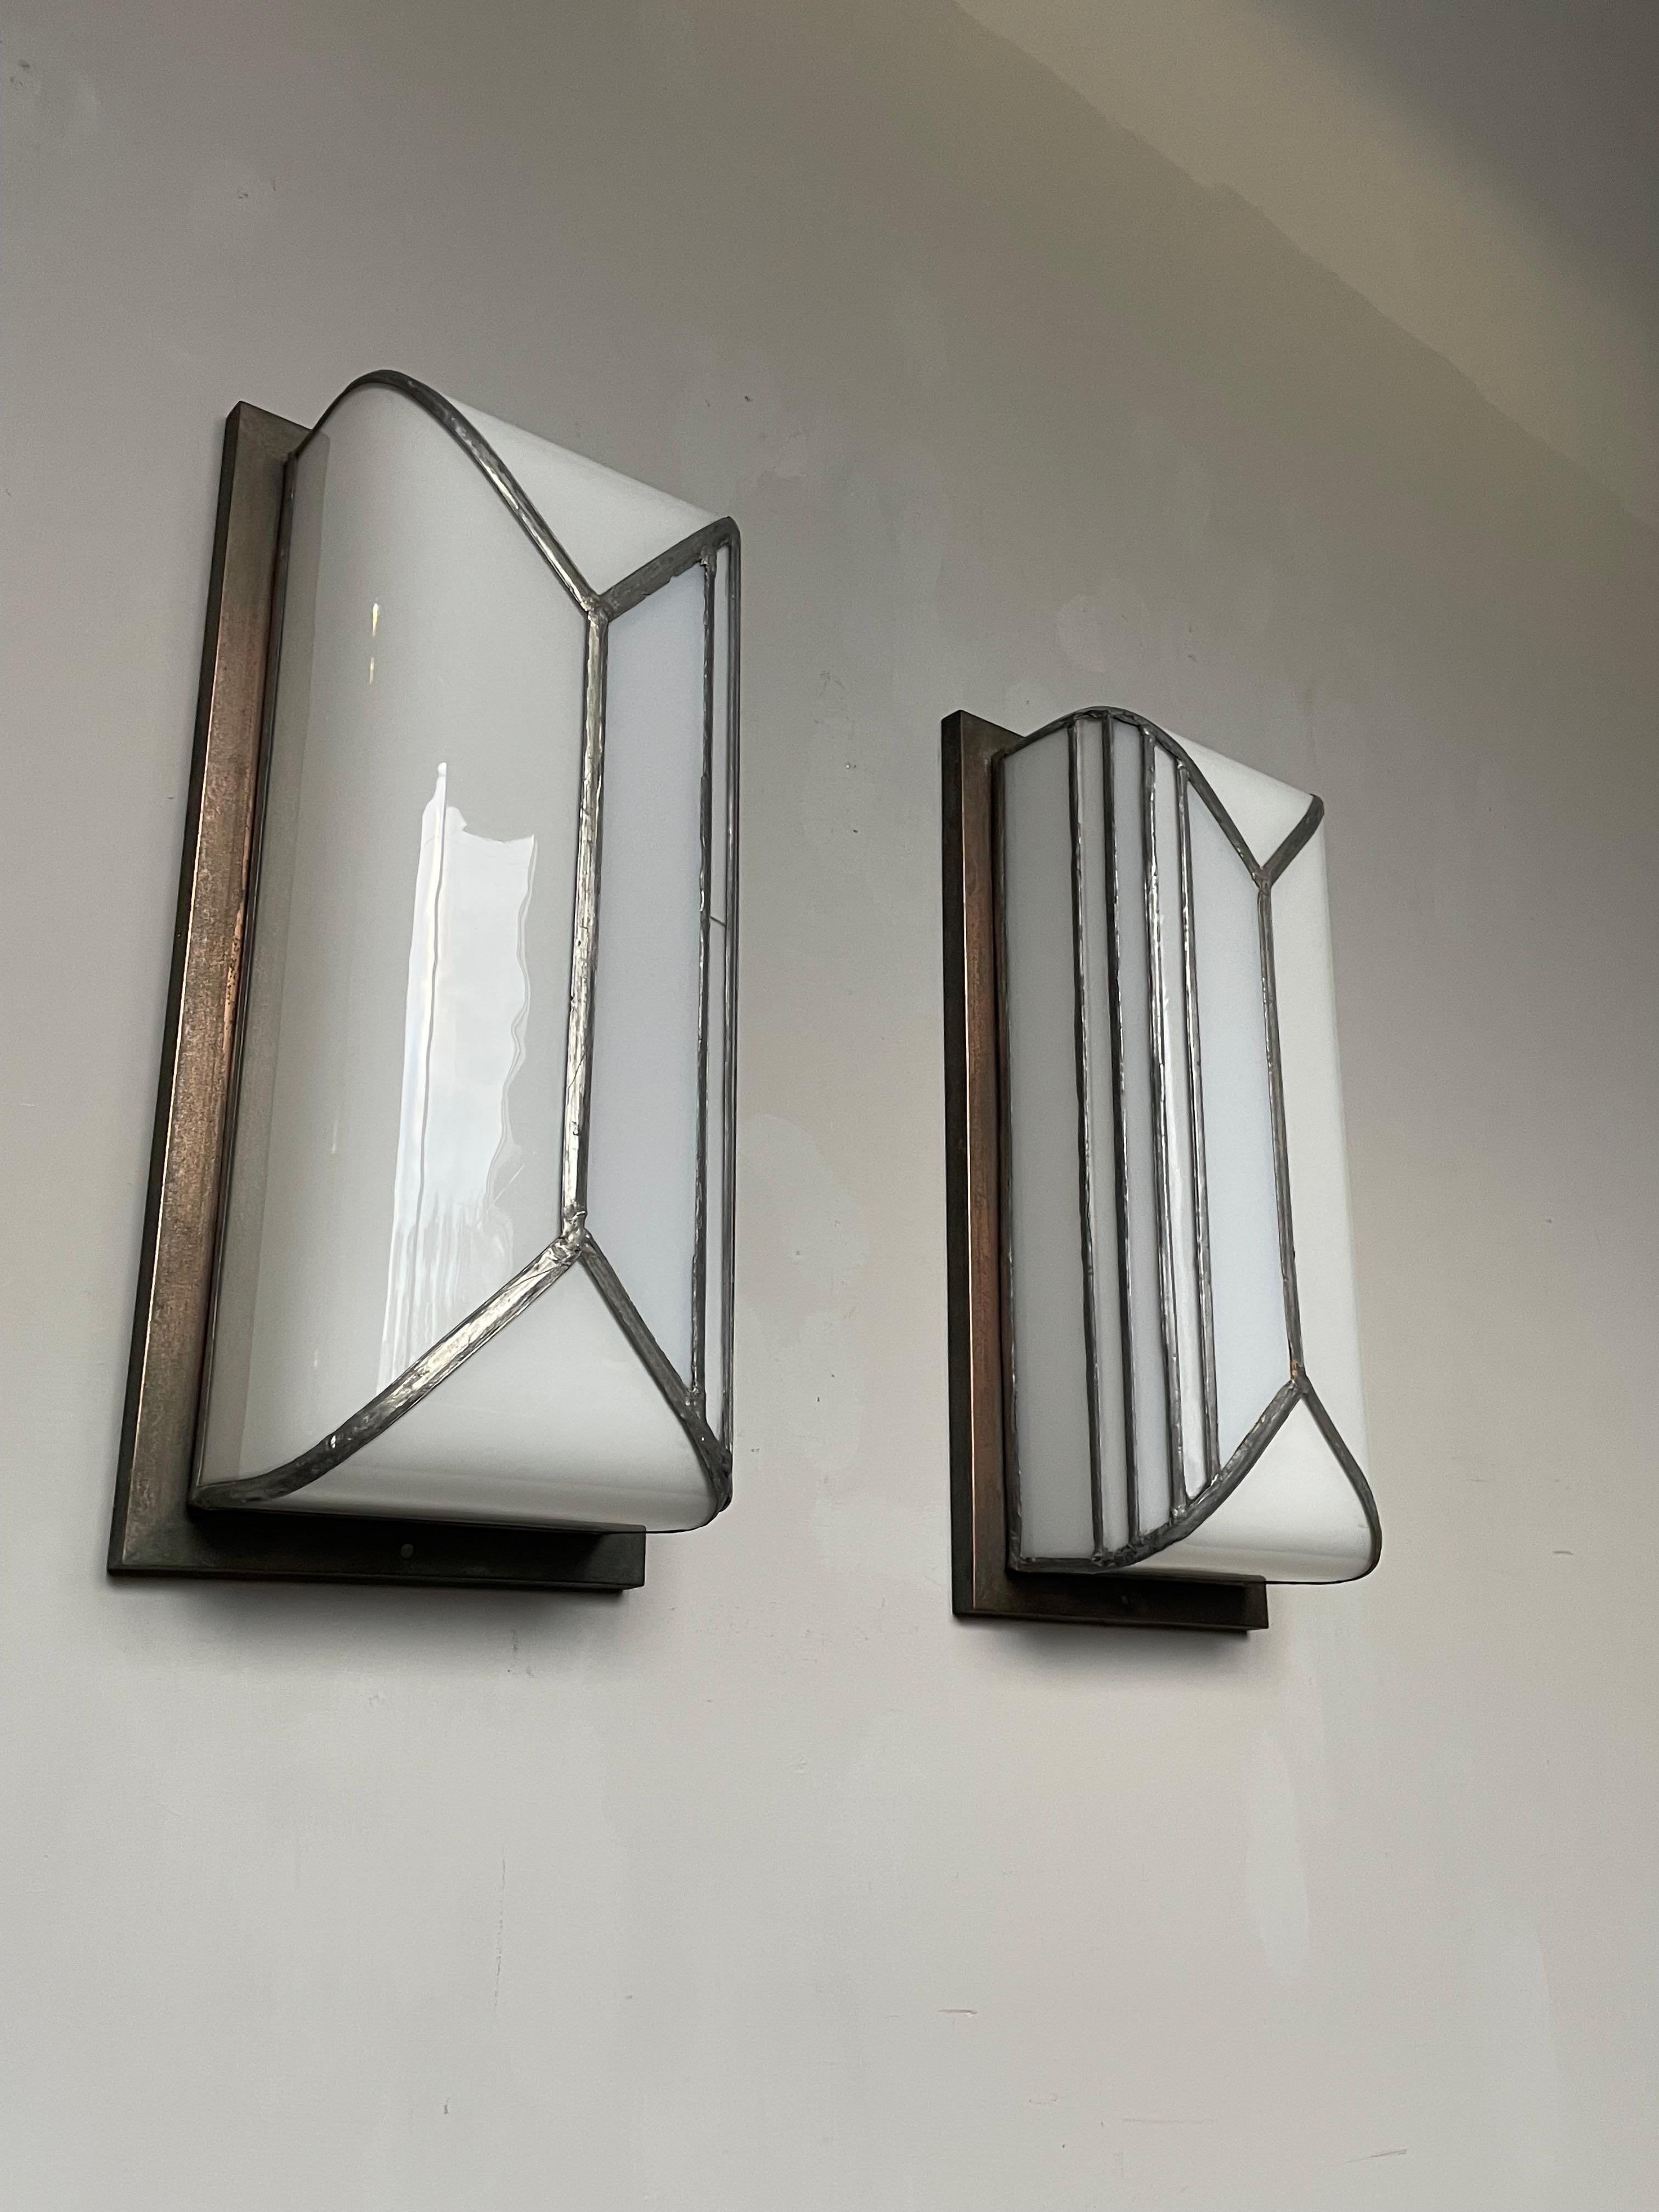 Good size, very rare and all handcrafted pair of Art Deco flush mounts or wall lamps.

Some light fixtures you only find once in your life and that certainly is the case with this hand-crafted pair of pure white, opaline glass Art Deco flush mounts